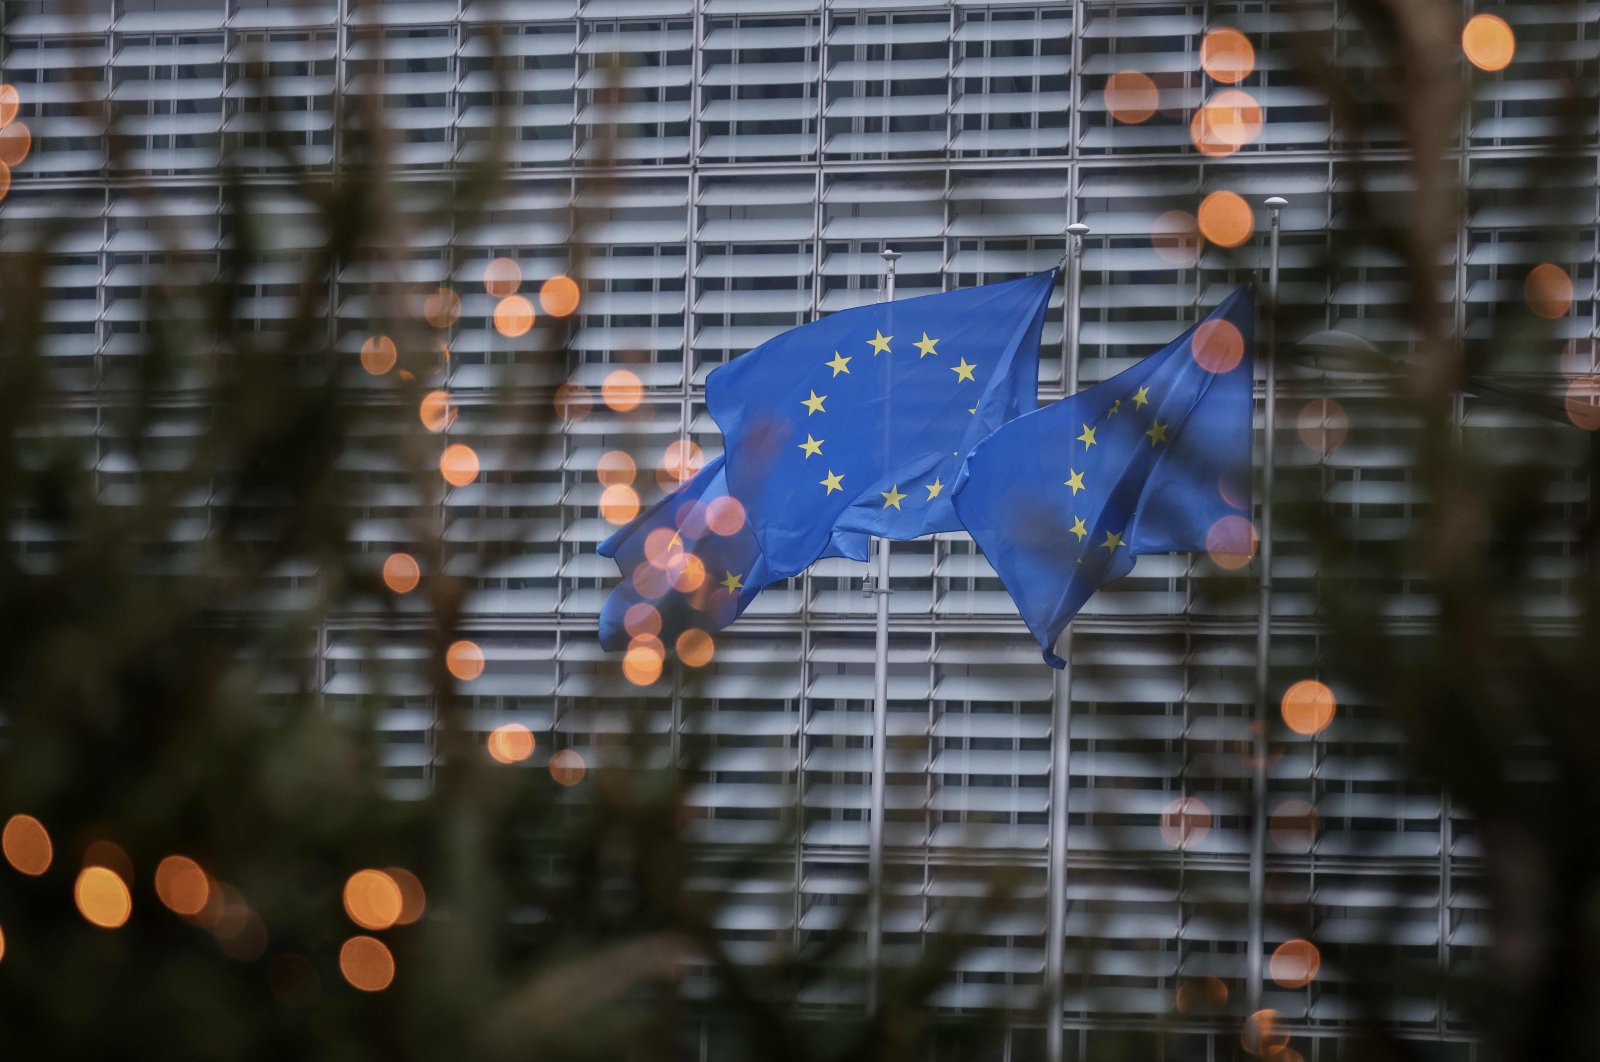 European Union flags fly outside the European Commission building in Brussels, Belgium, Dec. 7, 2020. (AFP Photo)